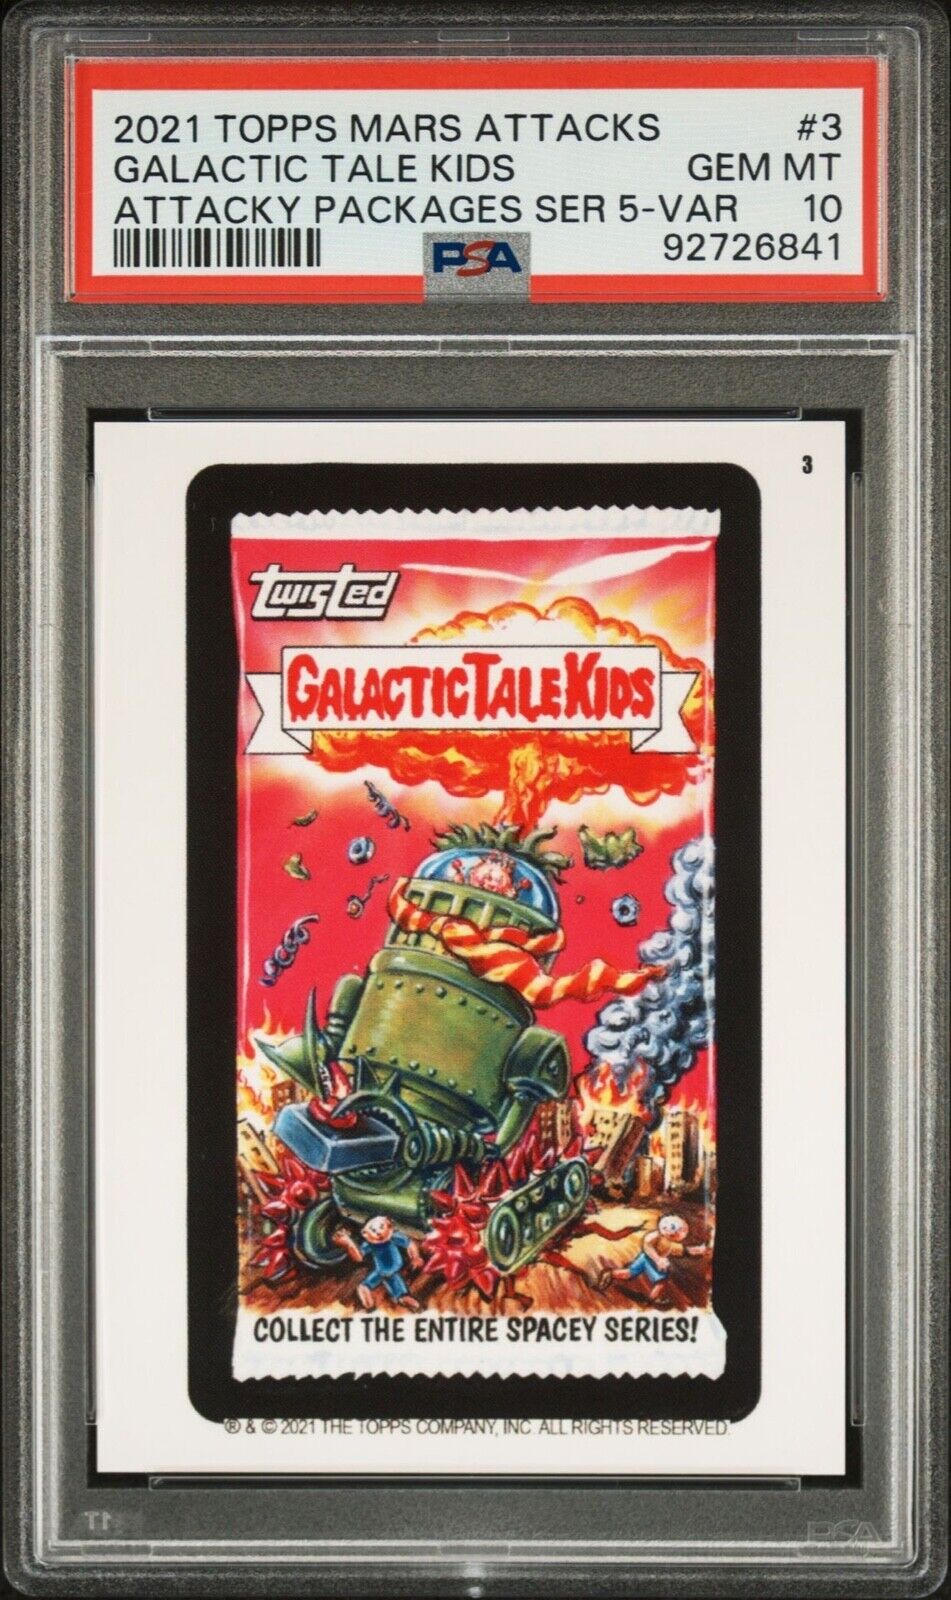 2021 Topps Mars Attacky WACKY PACKAGES Galactic Tale Kids Variant PSA 10 Gem #3